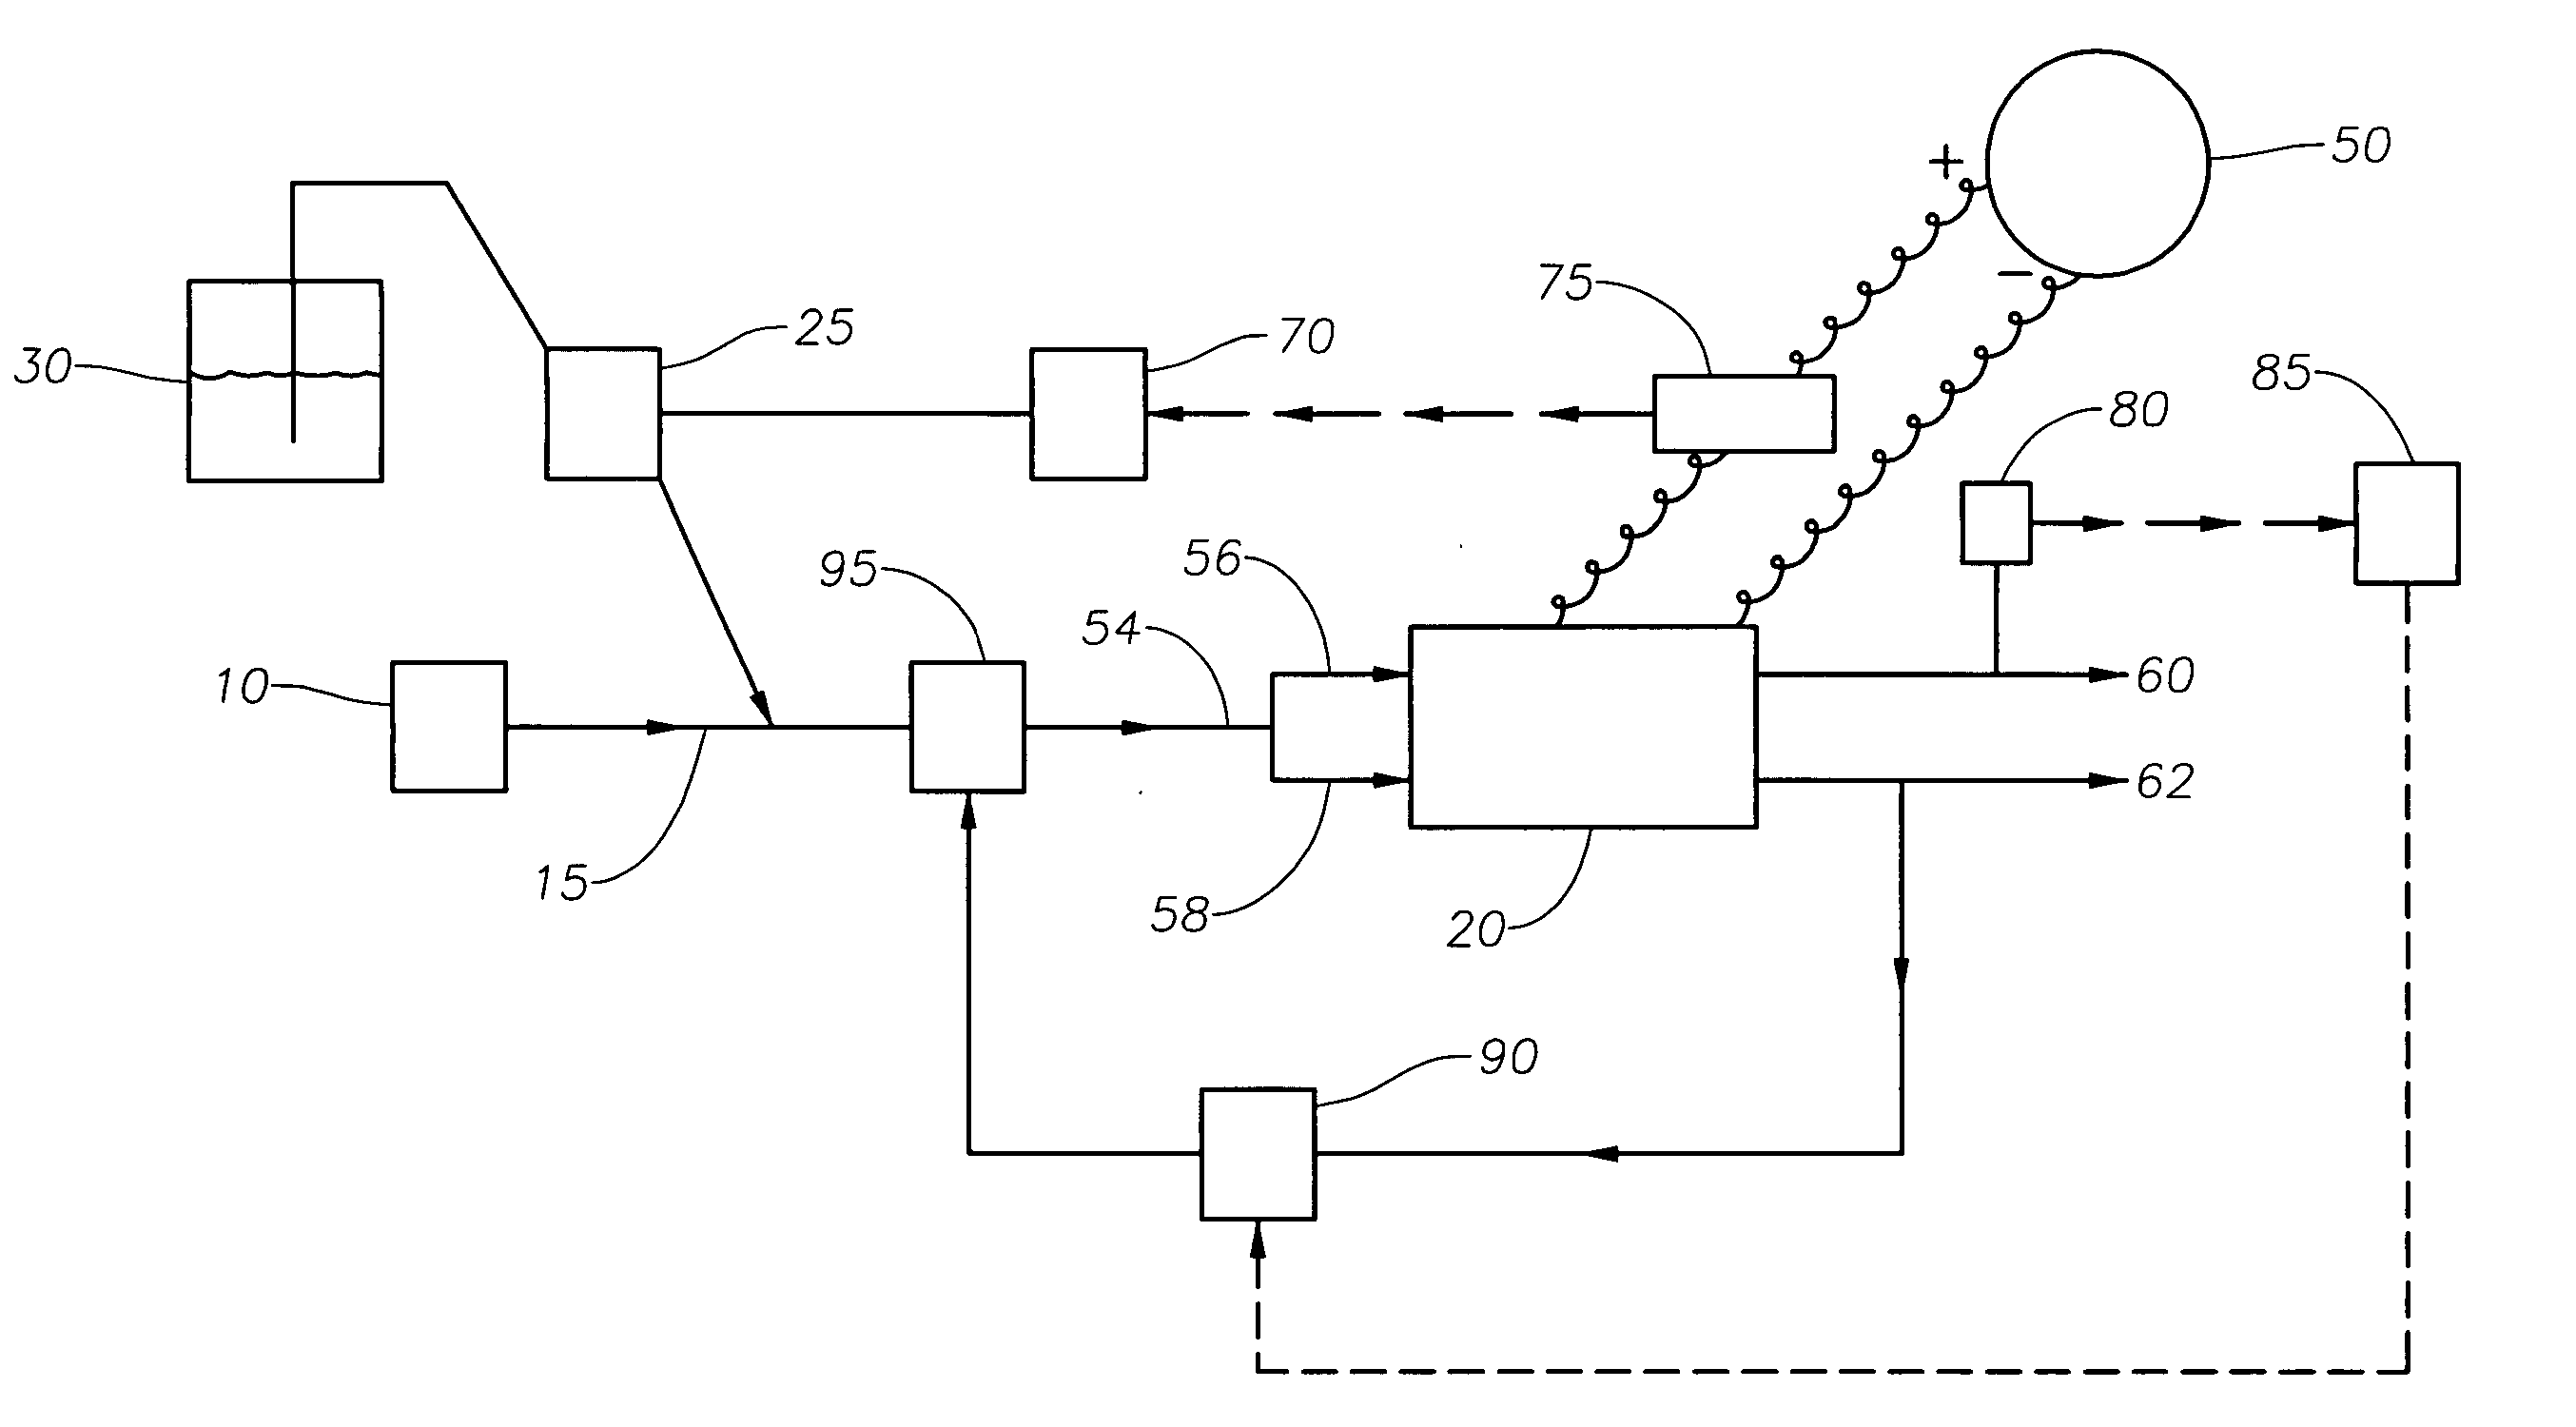 Apparatus and method for producing electrolyzed water